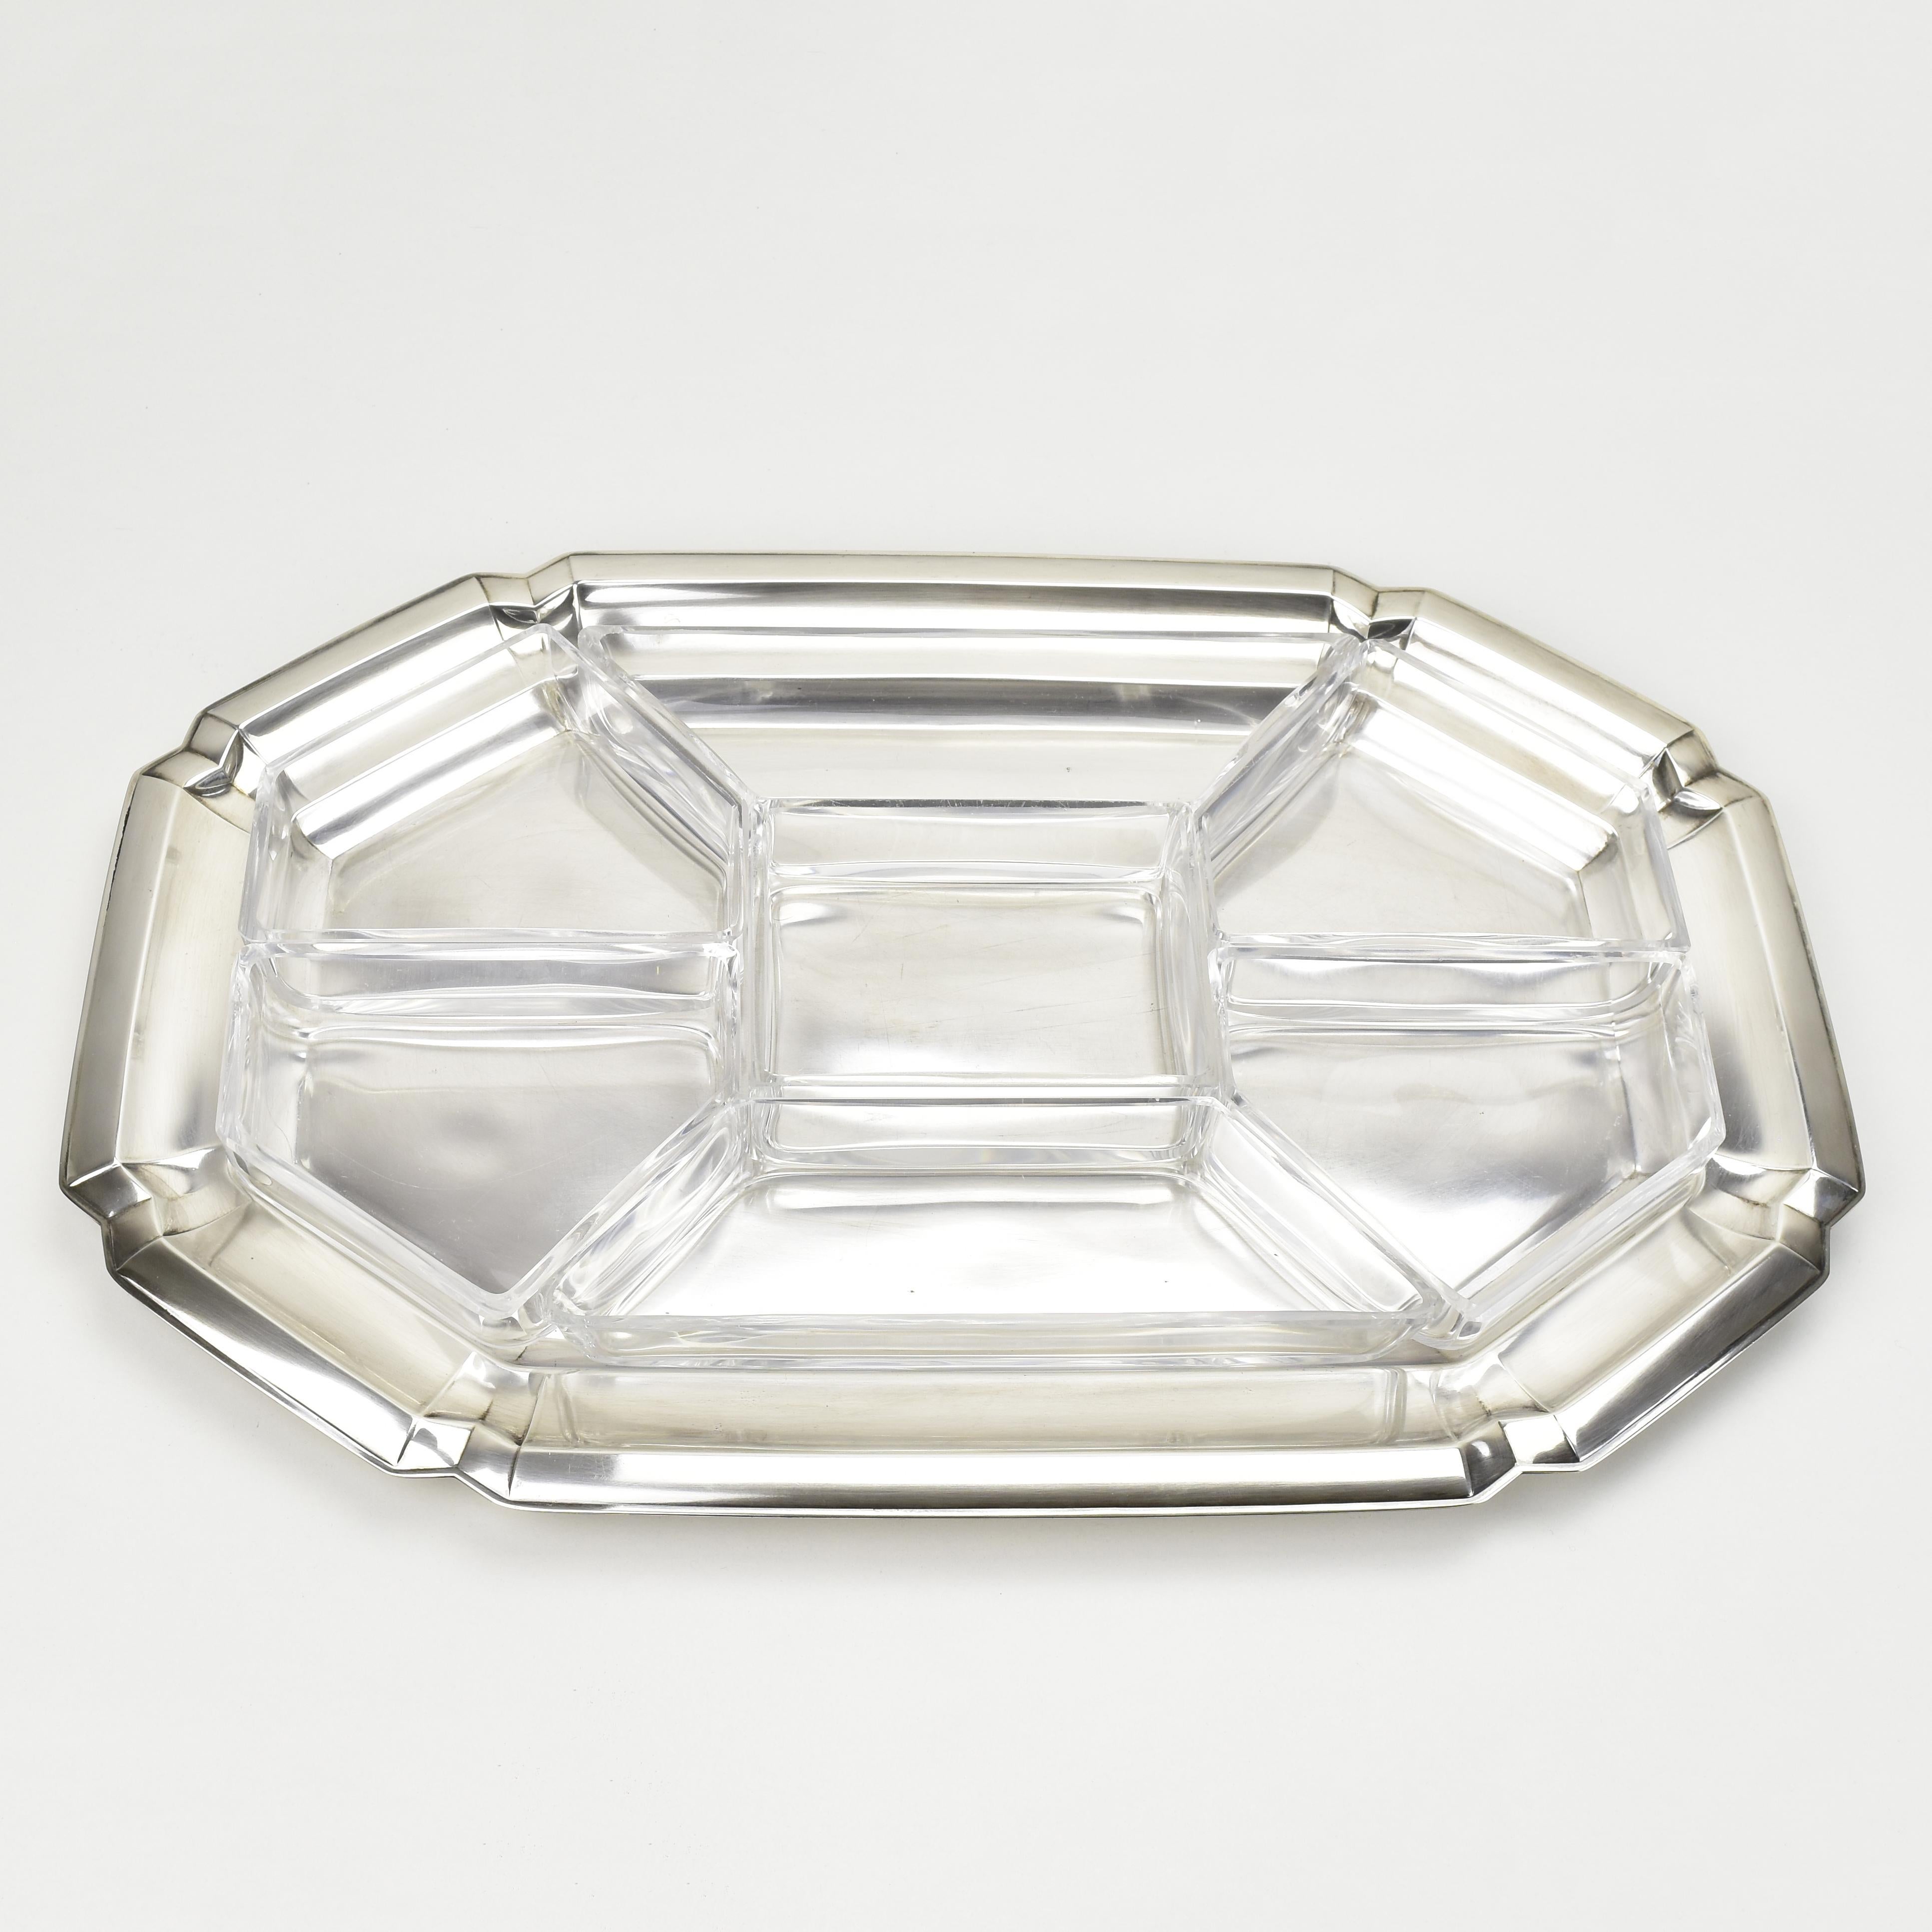 Hand-Crafted Large Art Deco Cabaret Bar Snack Tray by Quist Silverplate & Cut Crystal Liners For Sale